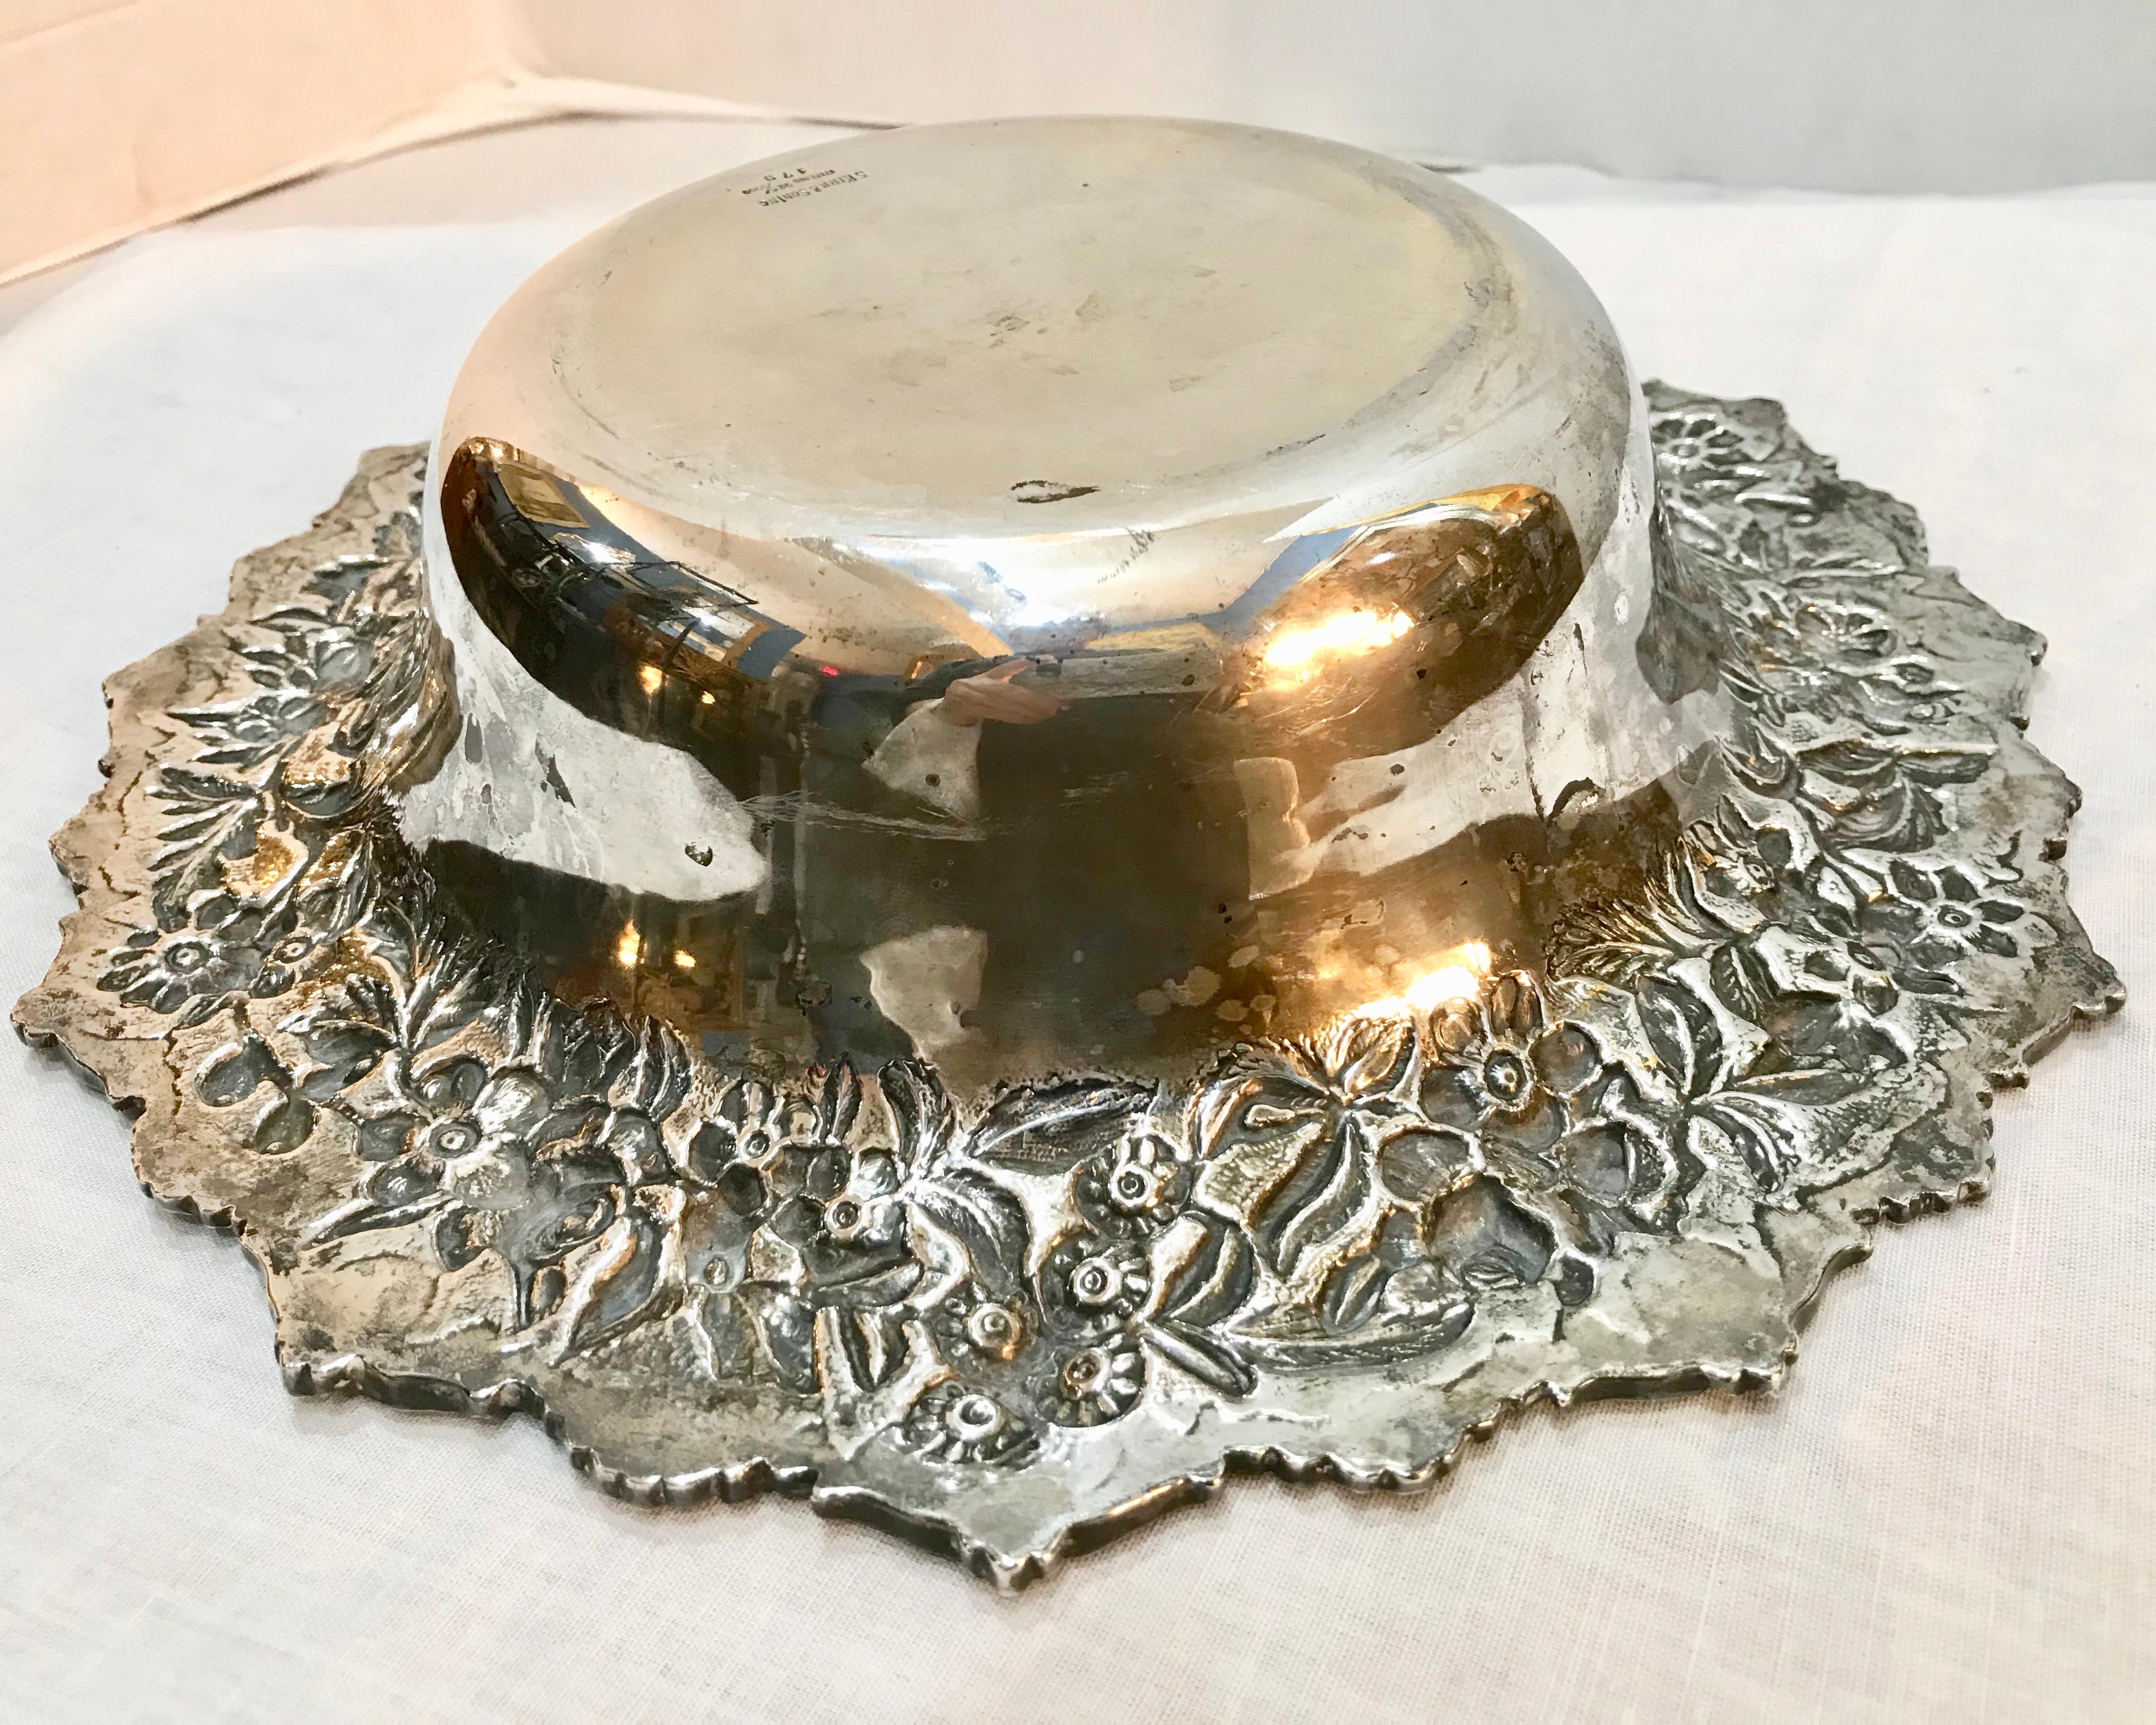 S Kirk & Sons Repousse Sterling Silver Center Bowl 7